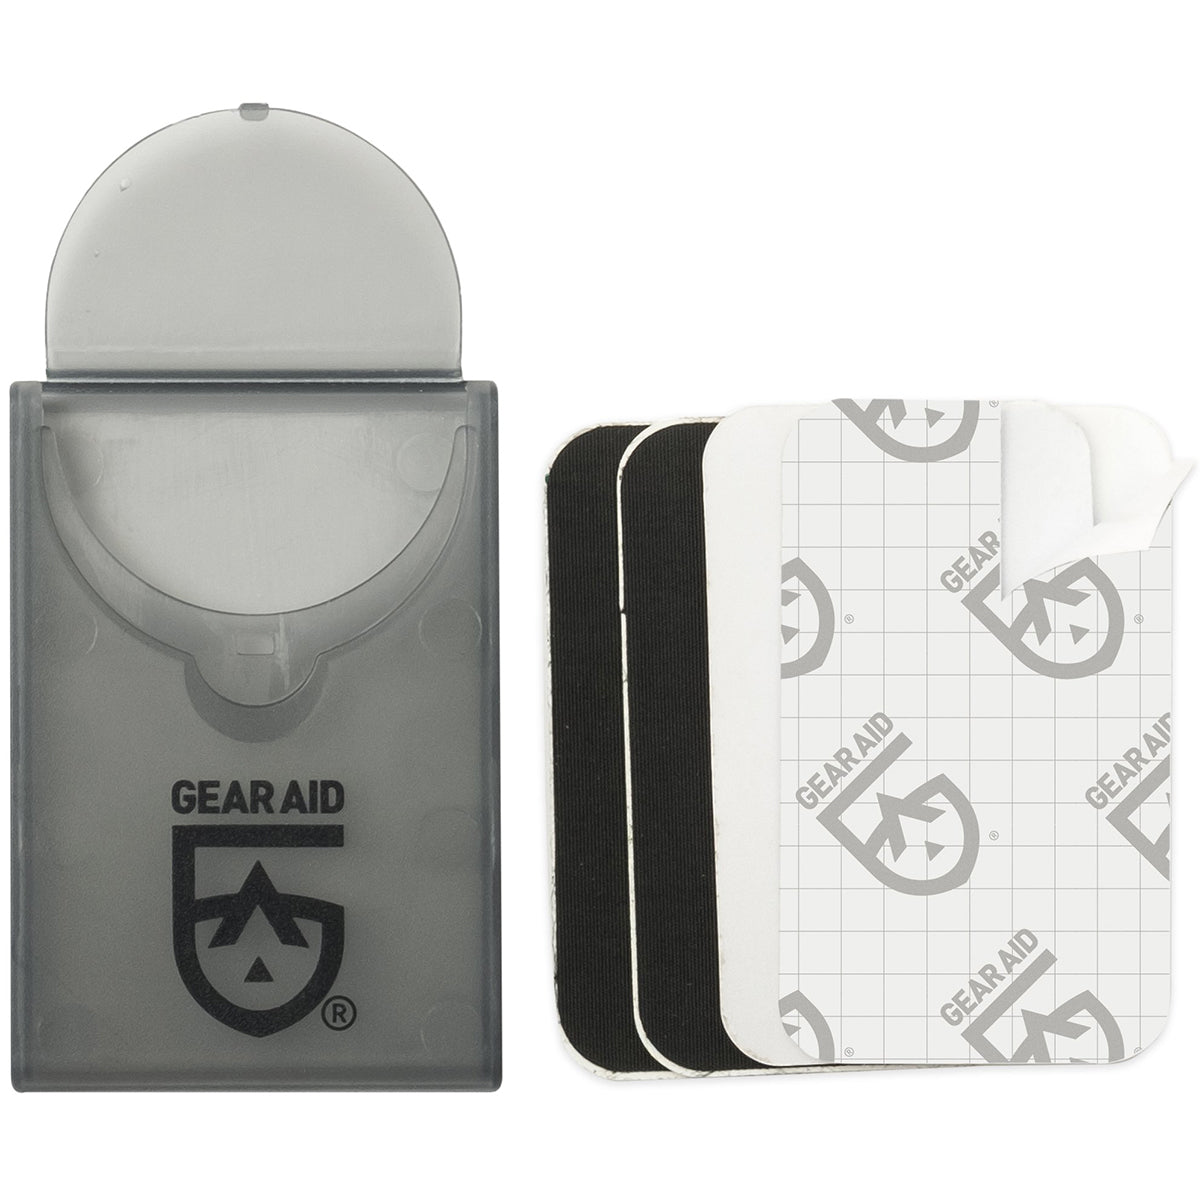 Gear Aid Tenacious Tape 1.5" x 2.5" No-Sew Peel and Stick Mini Patches Gear Aid